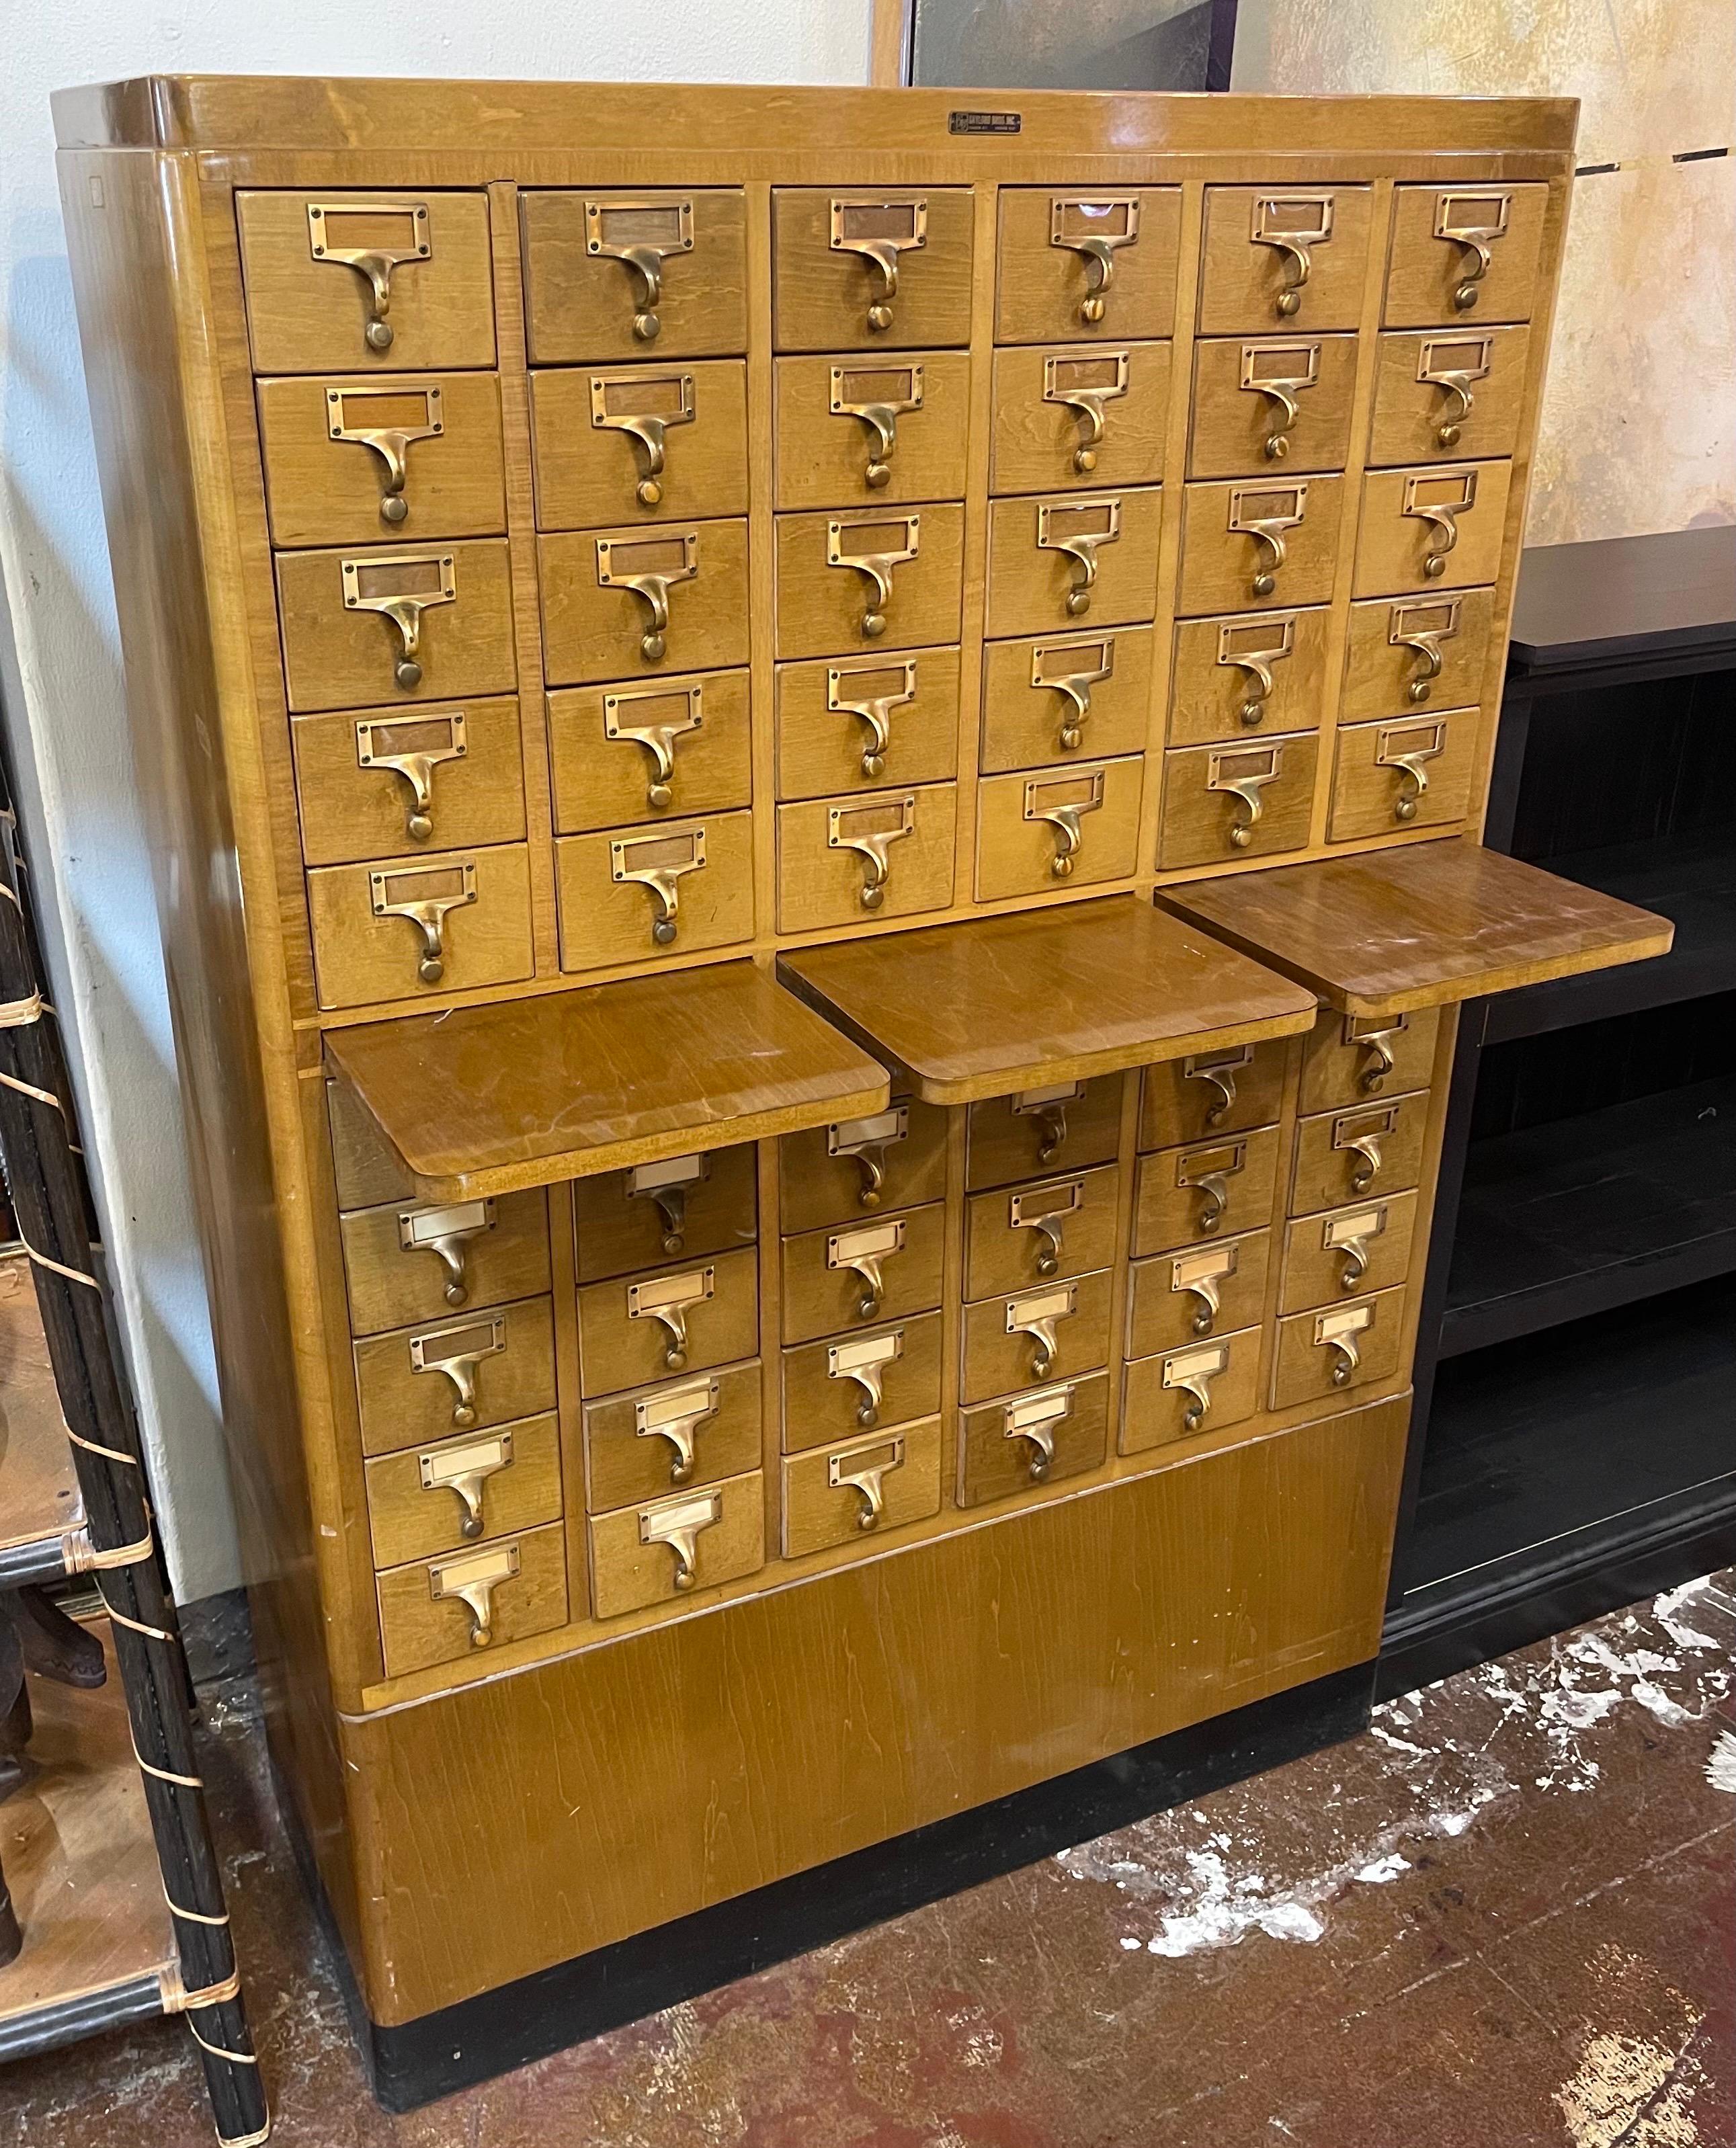 American Midcentury Sixty Drawer Library Card Catalog by Gaylord Brothers, Inc